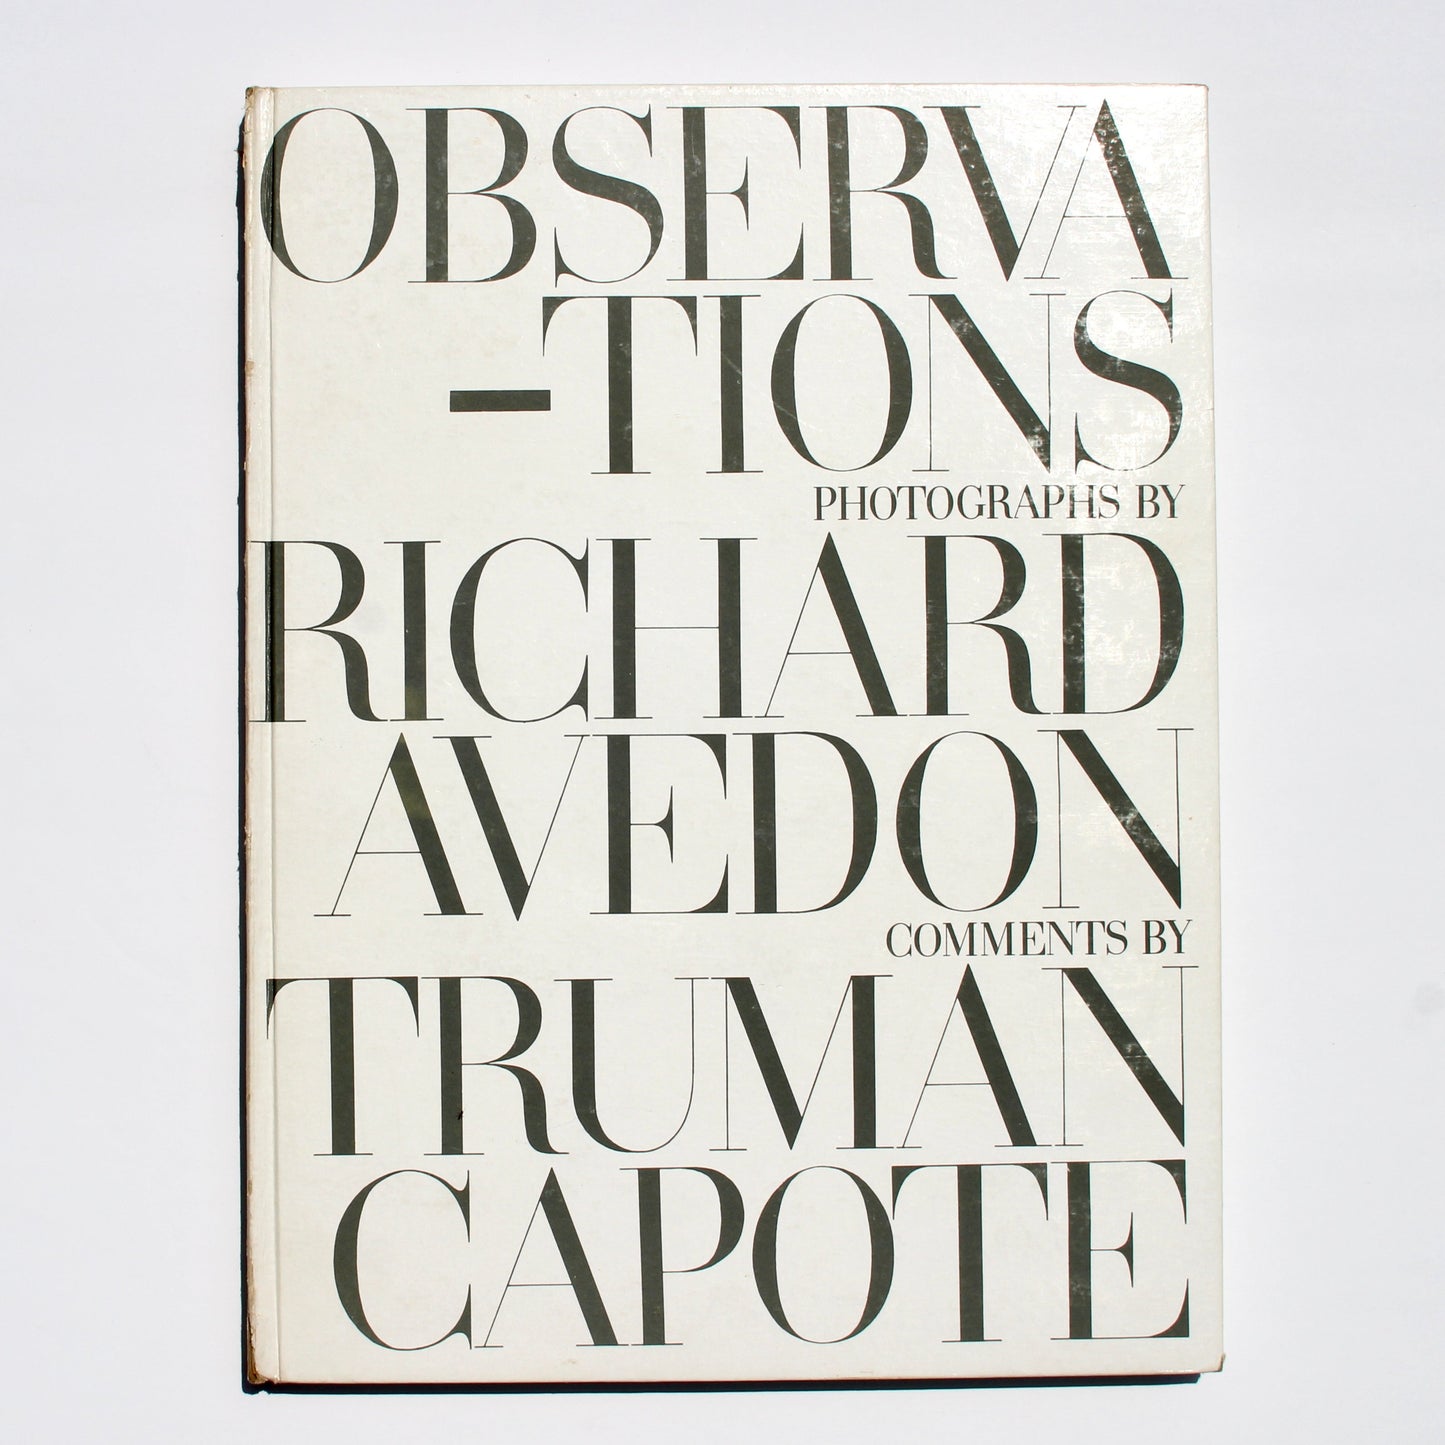 "Observations" by Richard Avedon + Truman Capote rare book